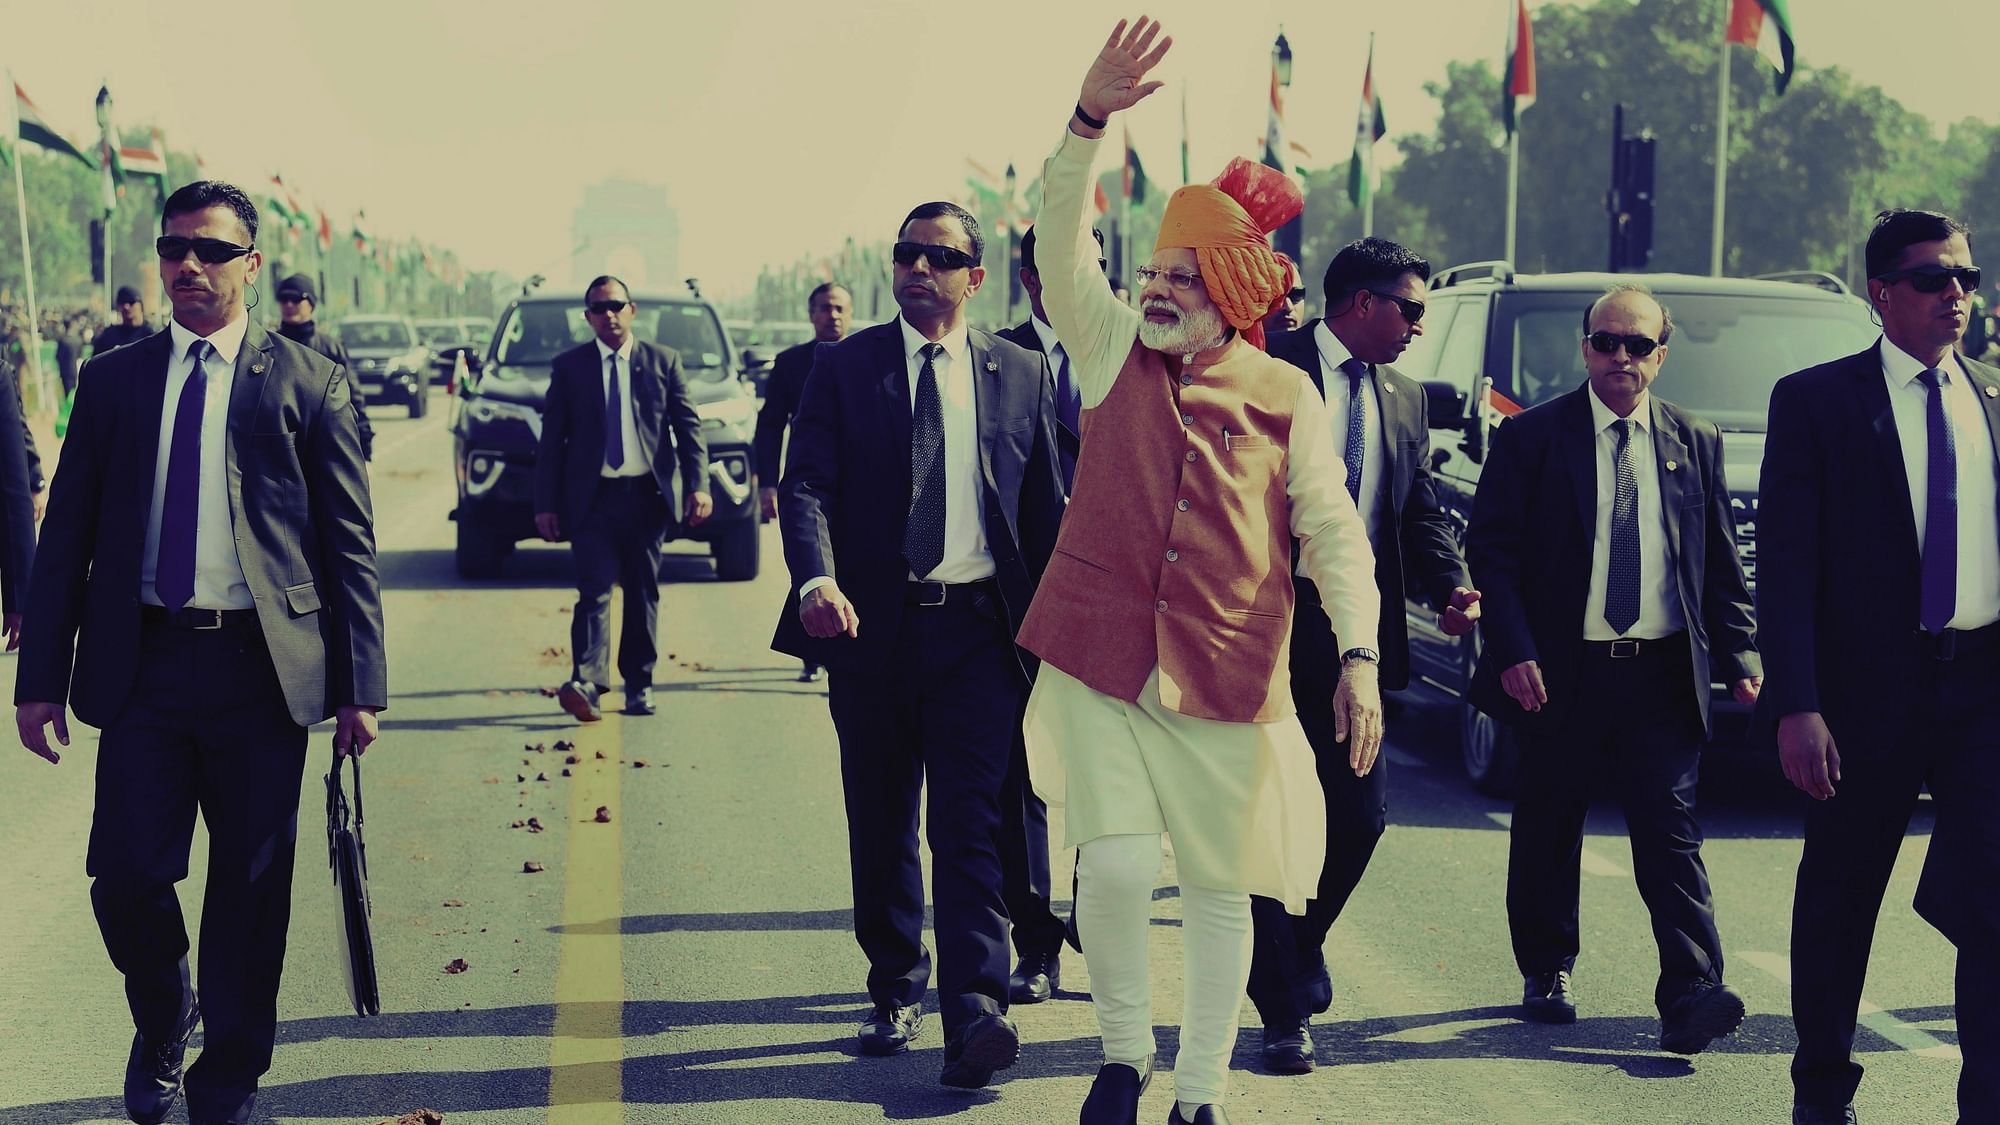 How trustworthy are Modi's bodyguards? What will happen if one of